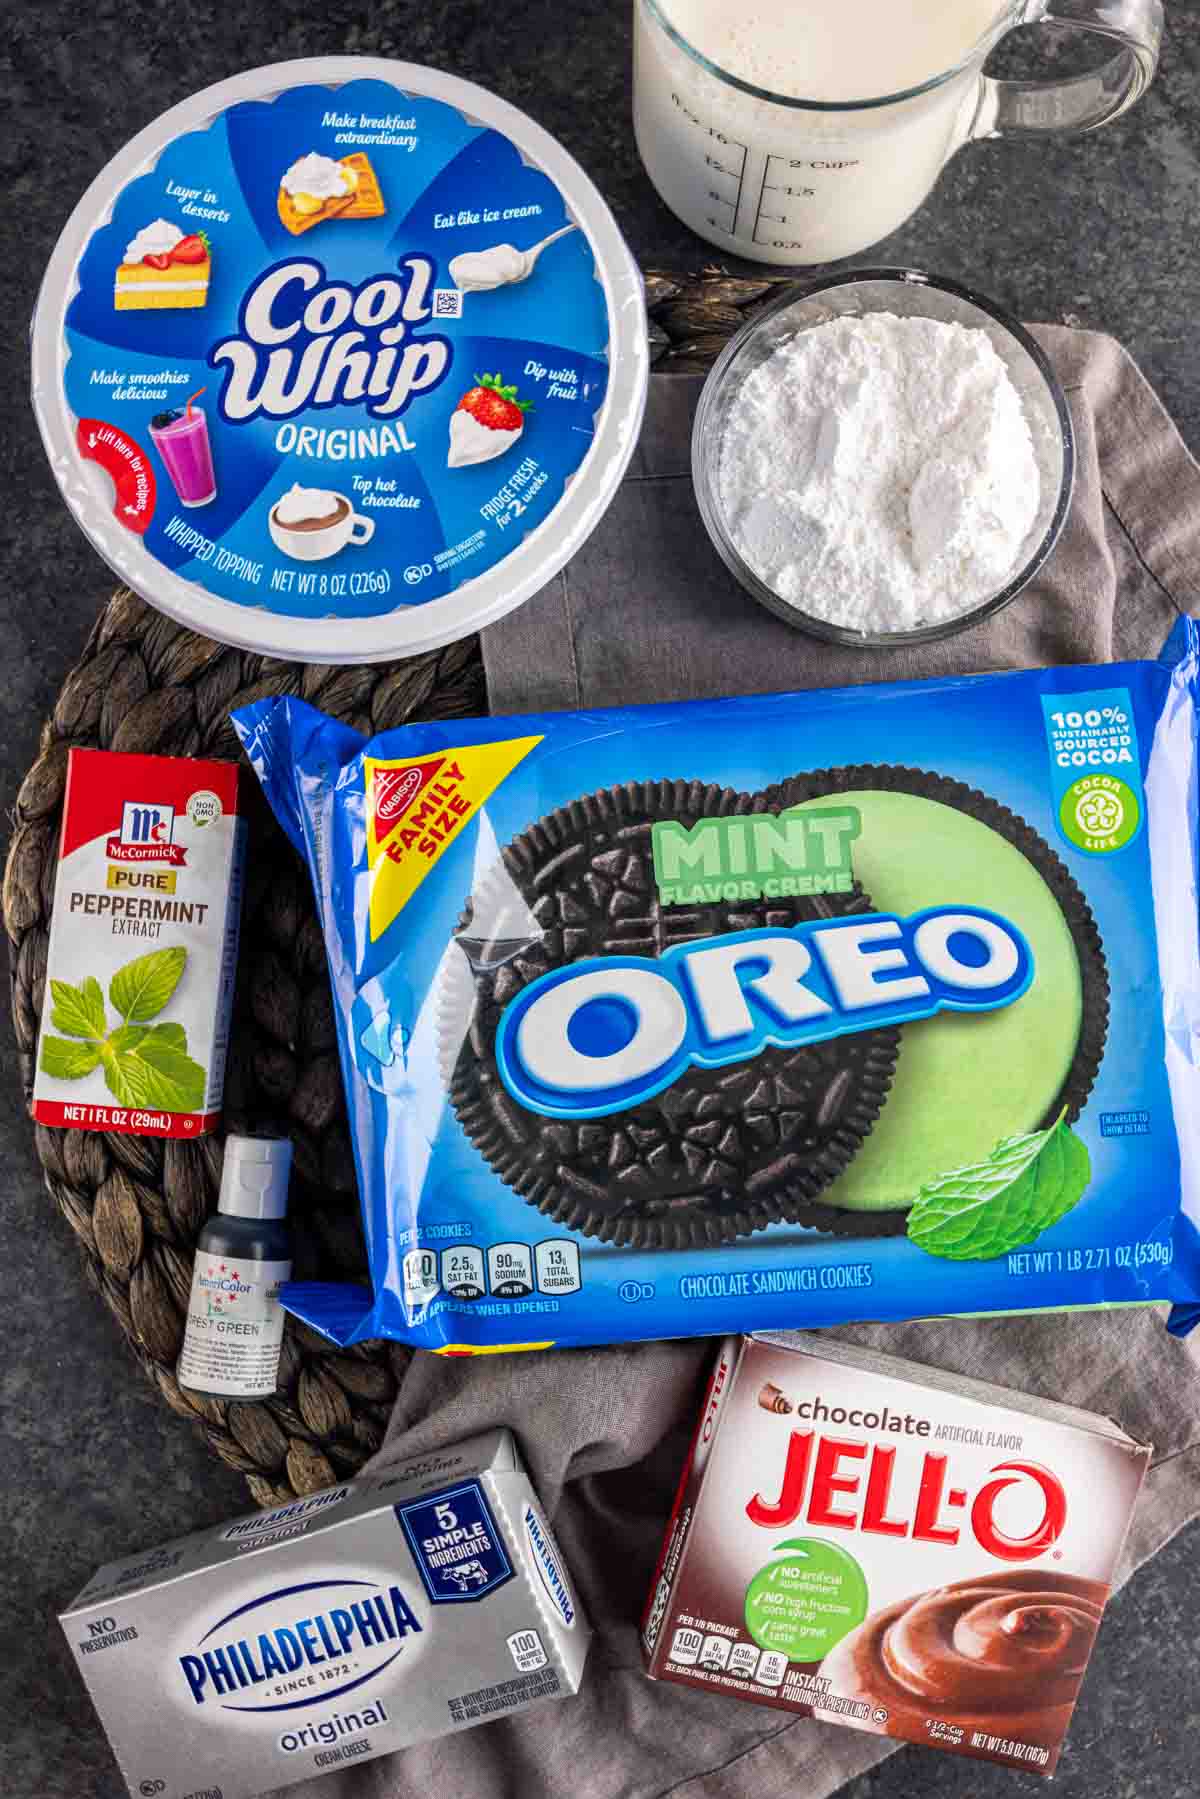 Ingredients for an mint oreo dessert